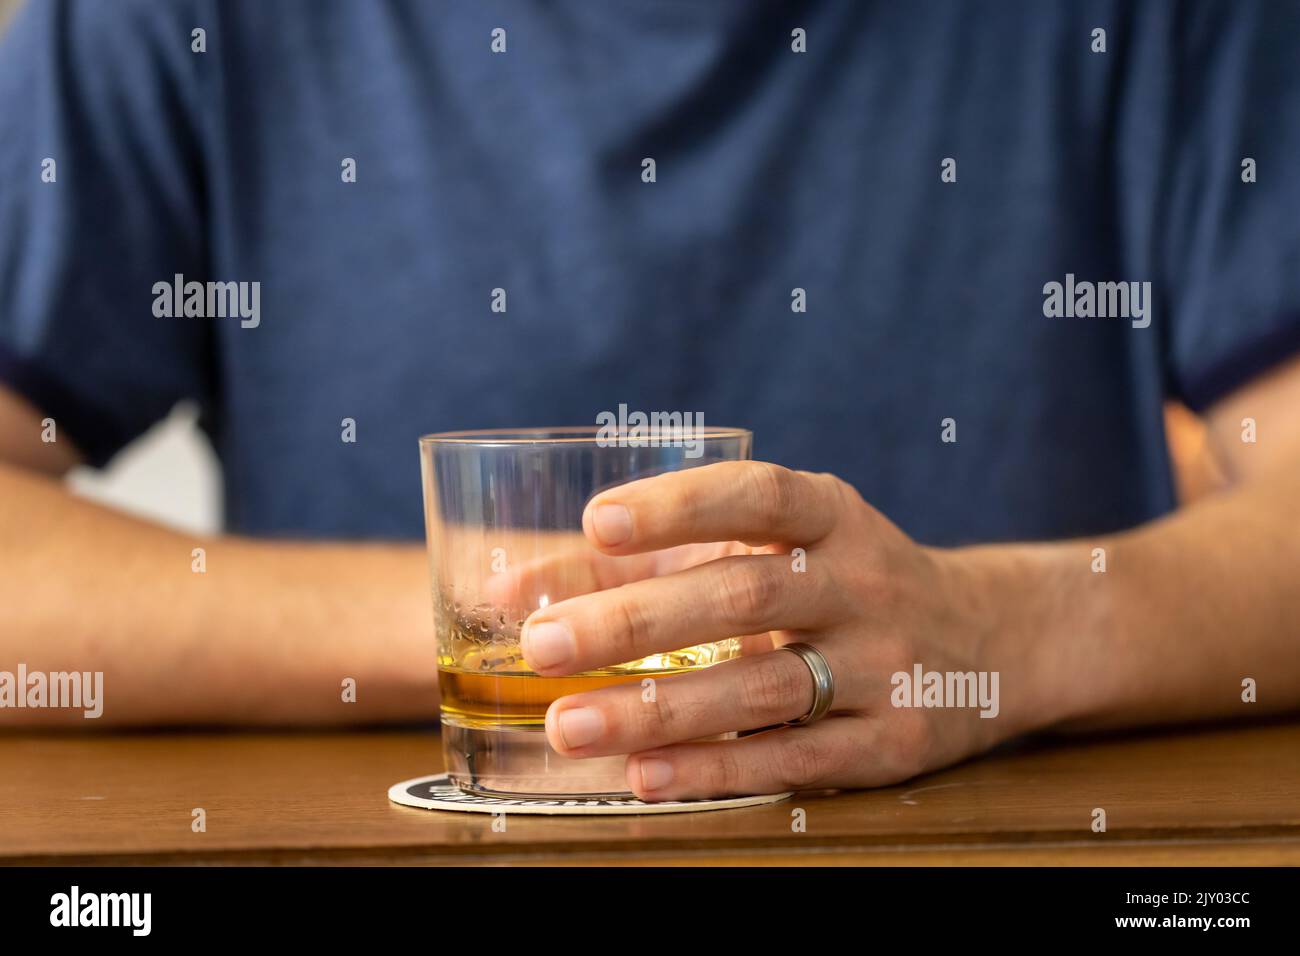 Man Holding a Whiskey Glass at a Bar Stock Photo